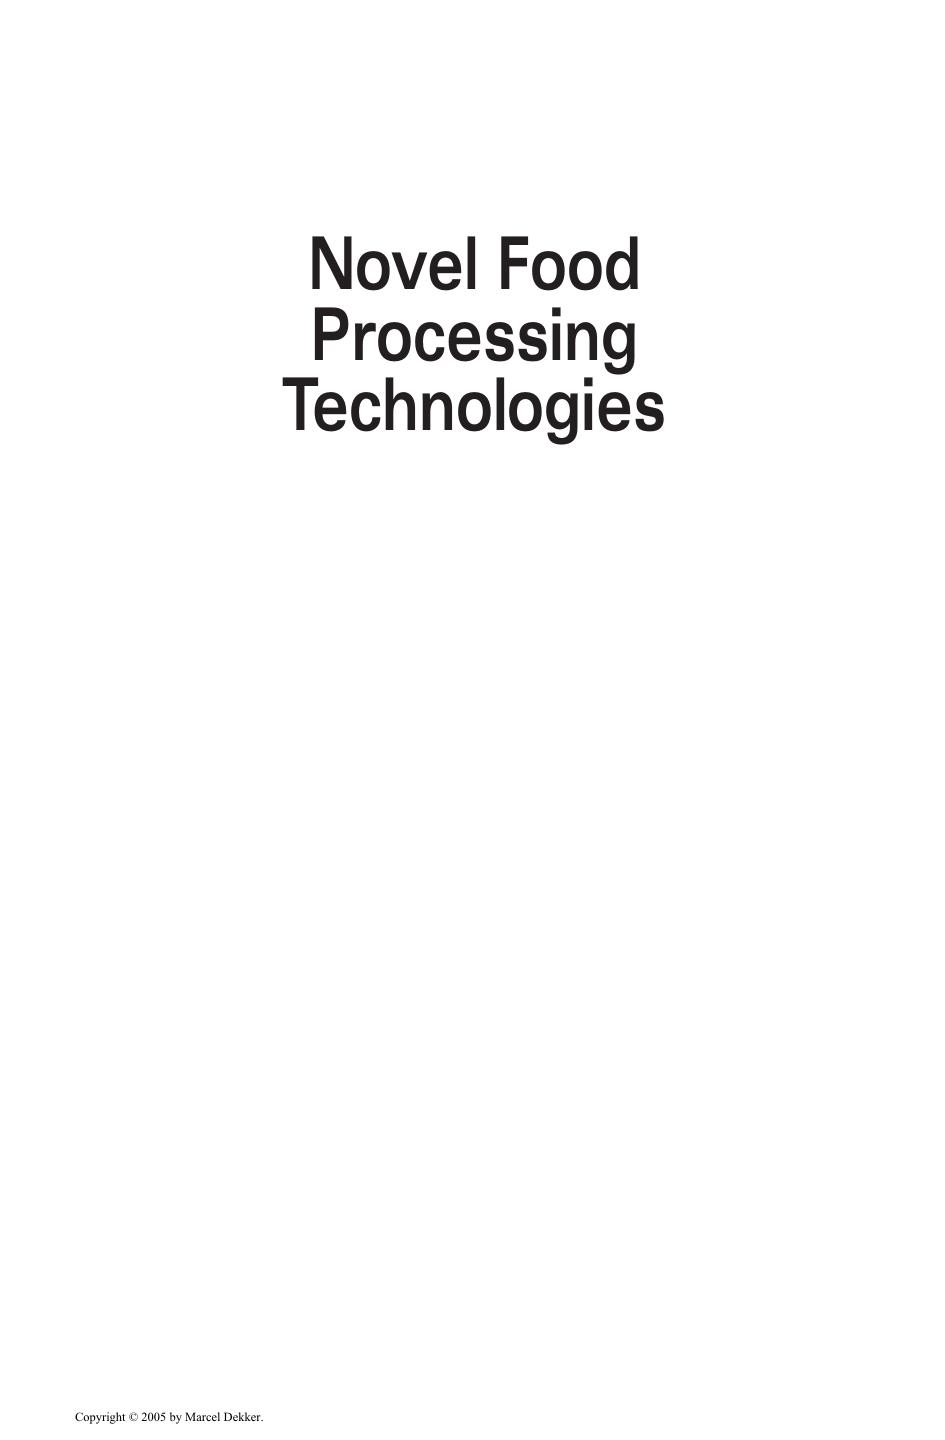 Novel Food Processing Technologies (Food Science and Technology) by Gustavo V. Barbosa-Cánovas María S. Tapia M. Pilar Cano